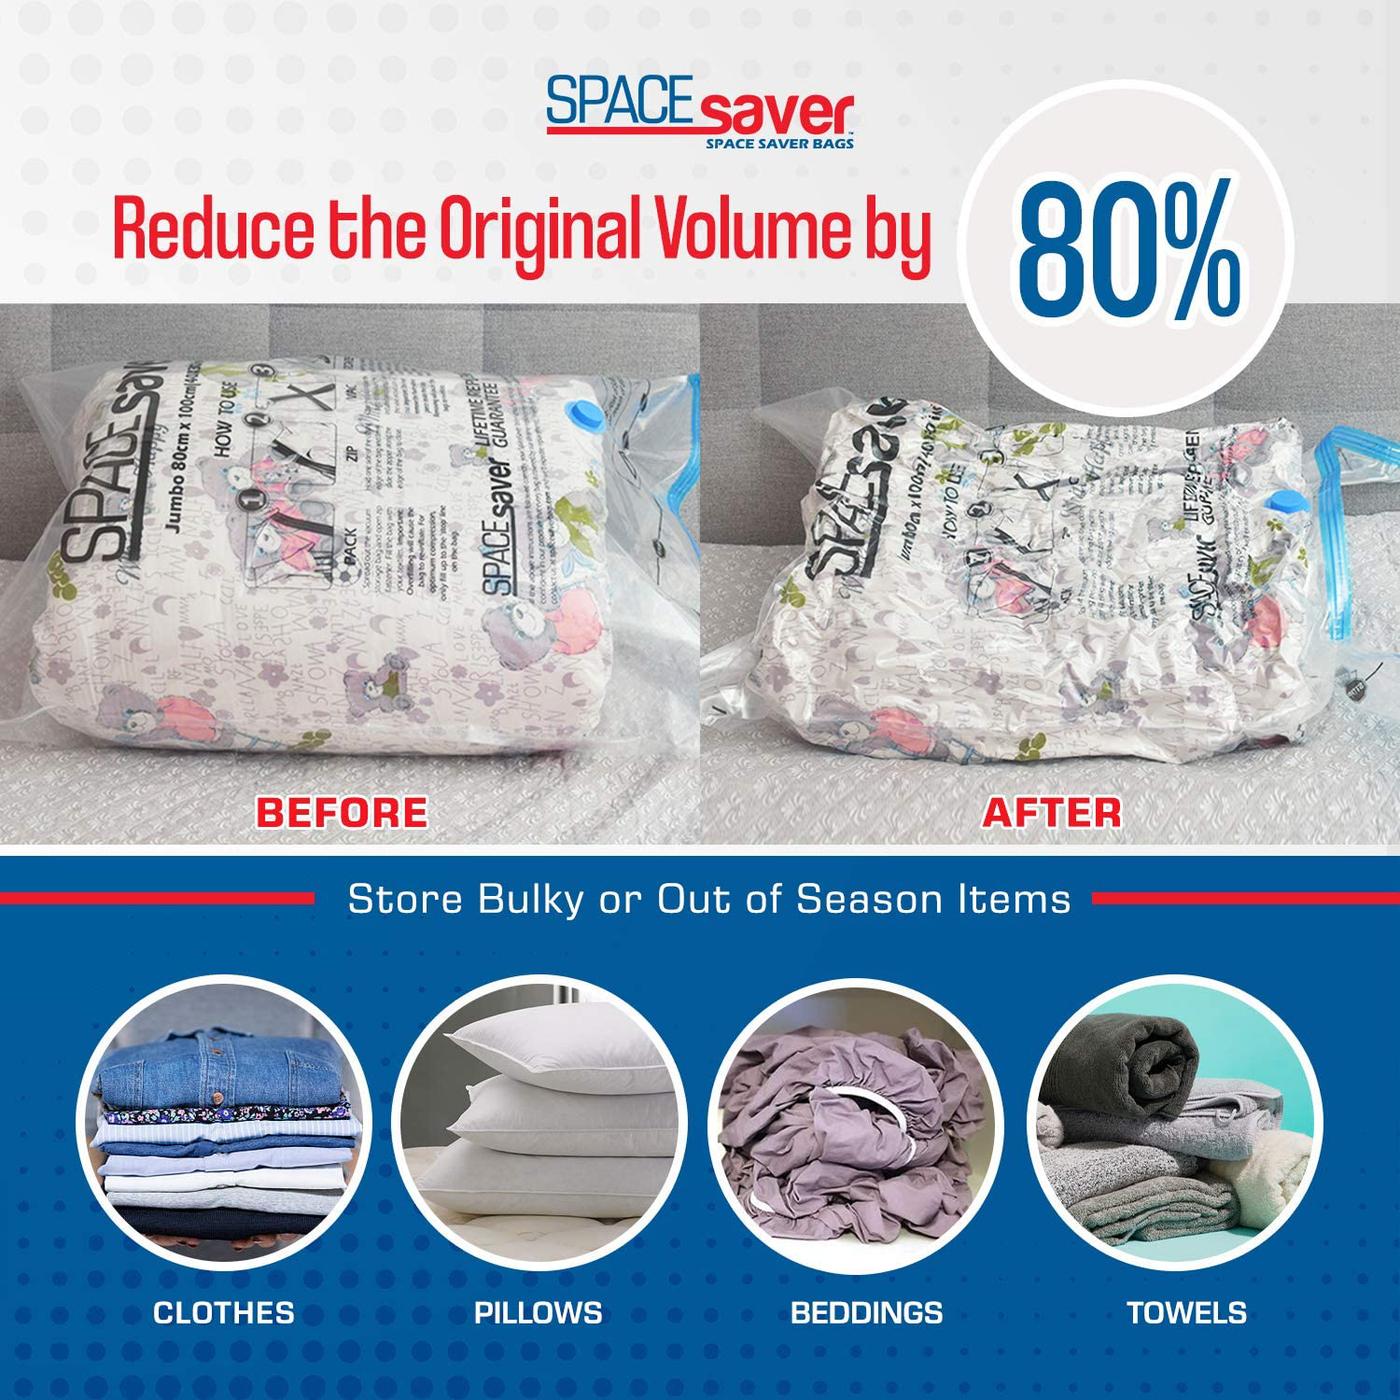 Spacesaver Premium Vacuum Storage Bags. 80% More Storage! Hand-Pump for Travel! Double-Zip Seal and Triple Seal Turbo-Valve for Max Space Saving! (Medium 6 Pack)